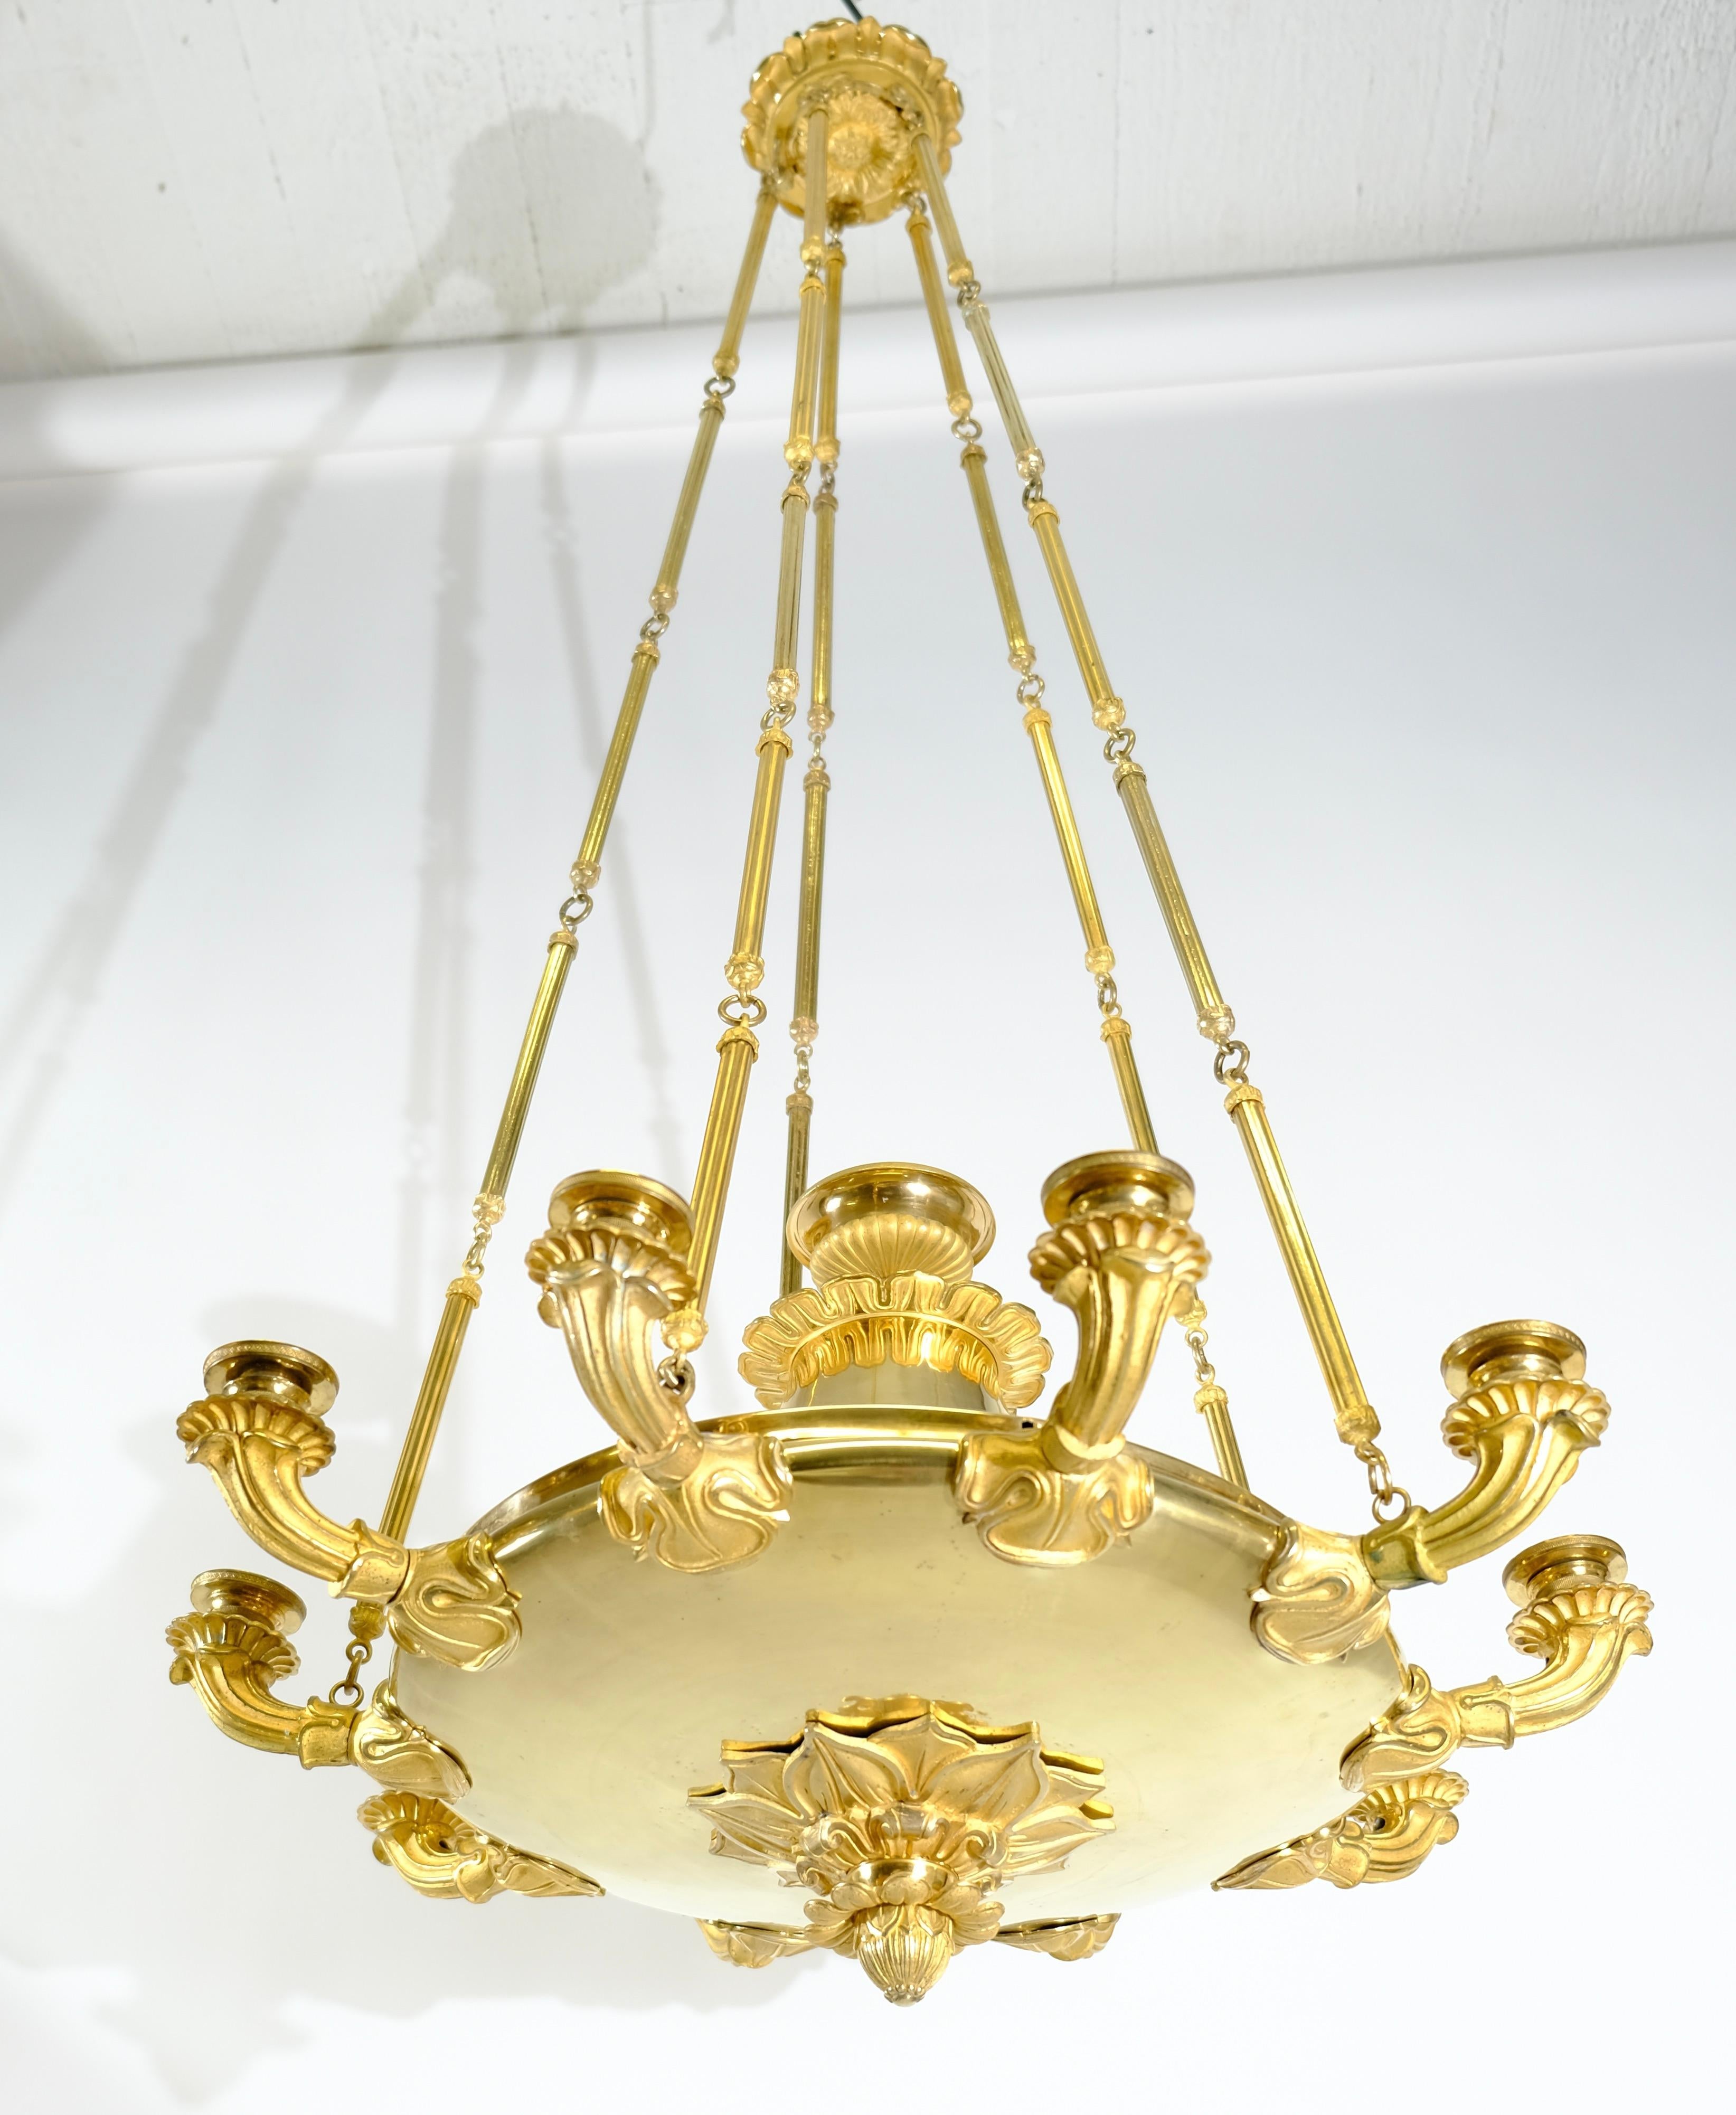 French Large Empire Chandelier with Ten Candleholders in great condition. Ca 1820. For Sale